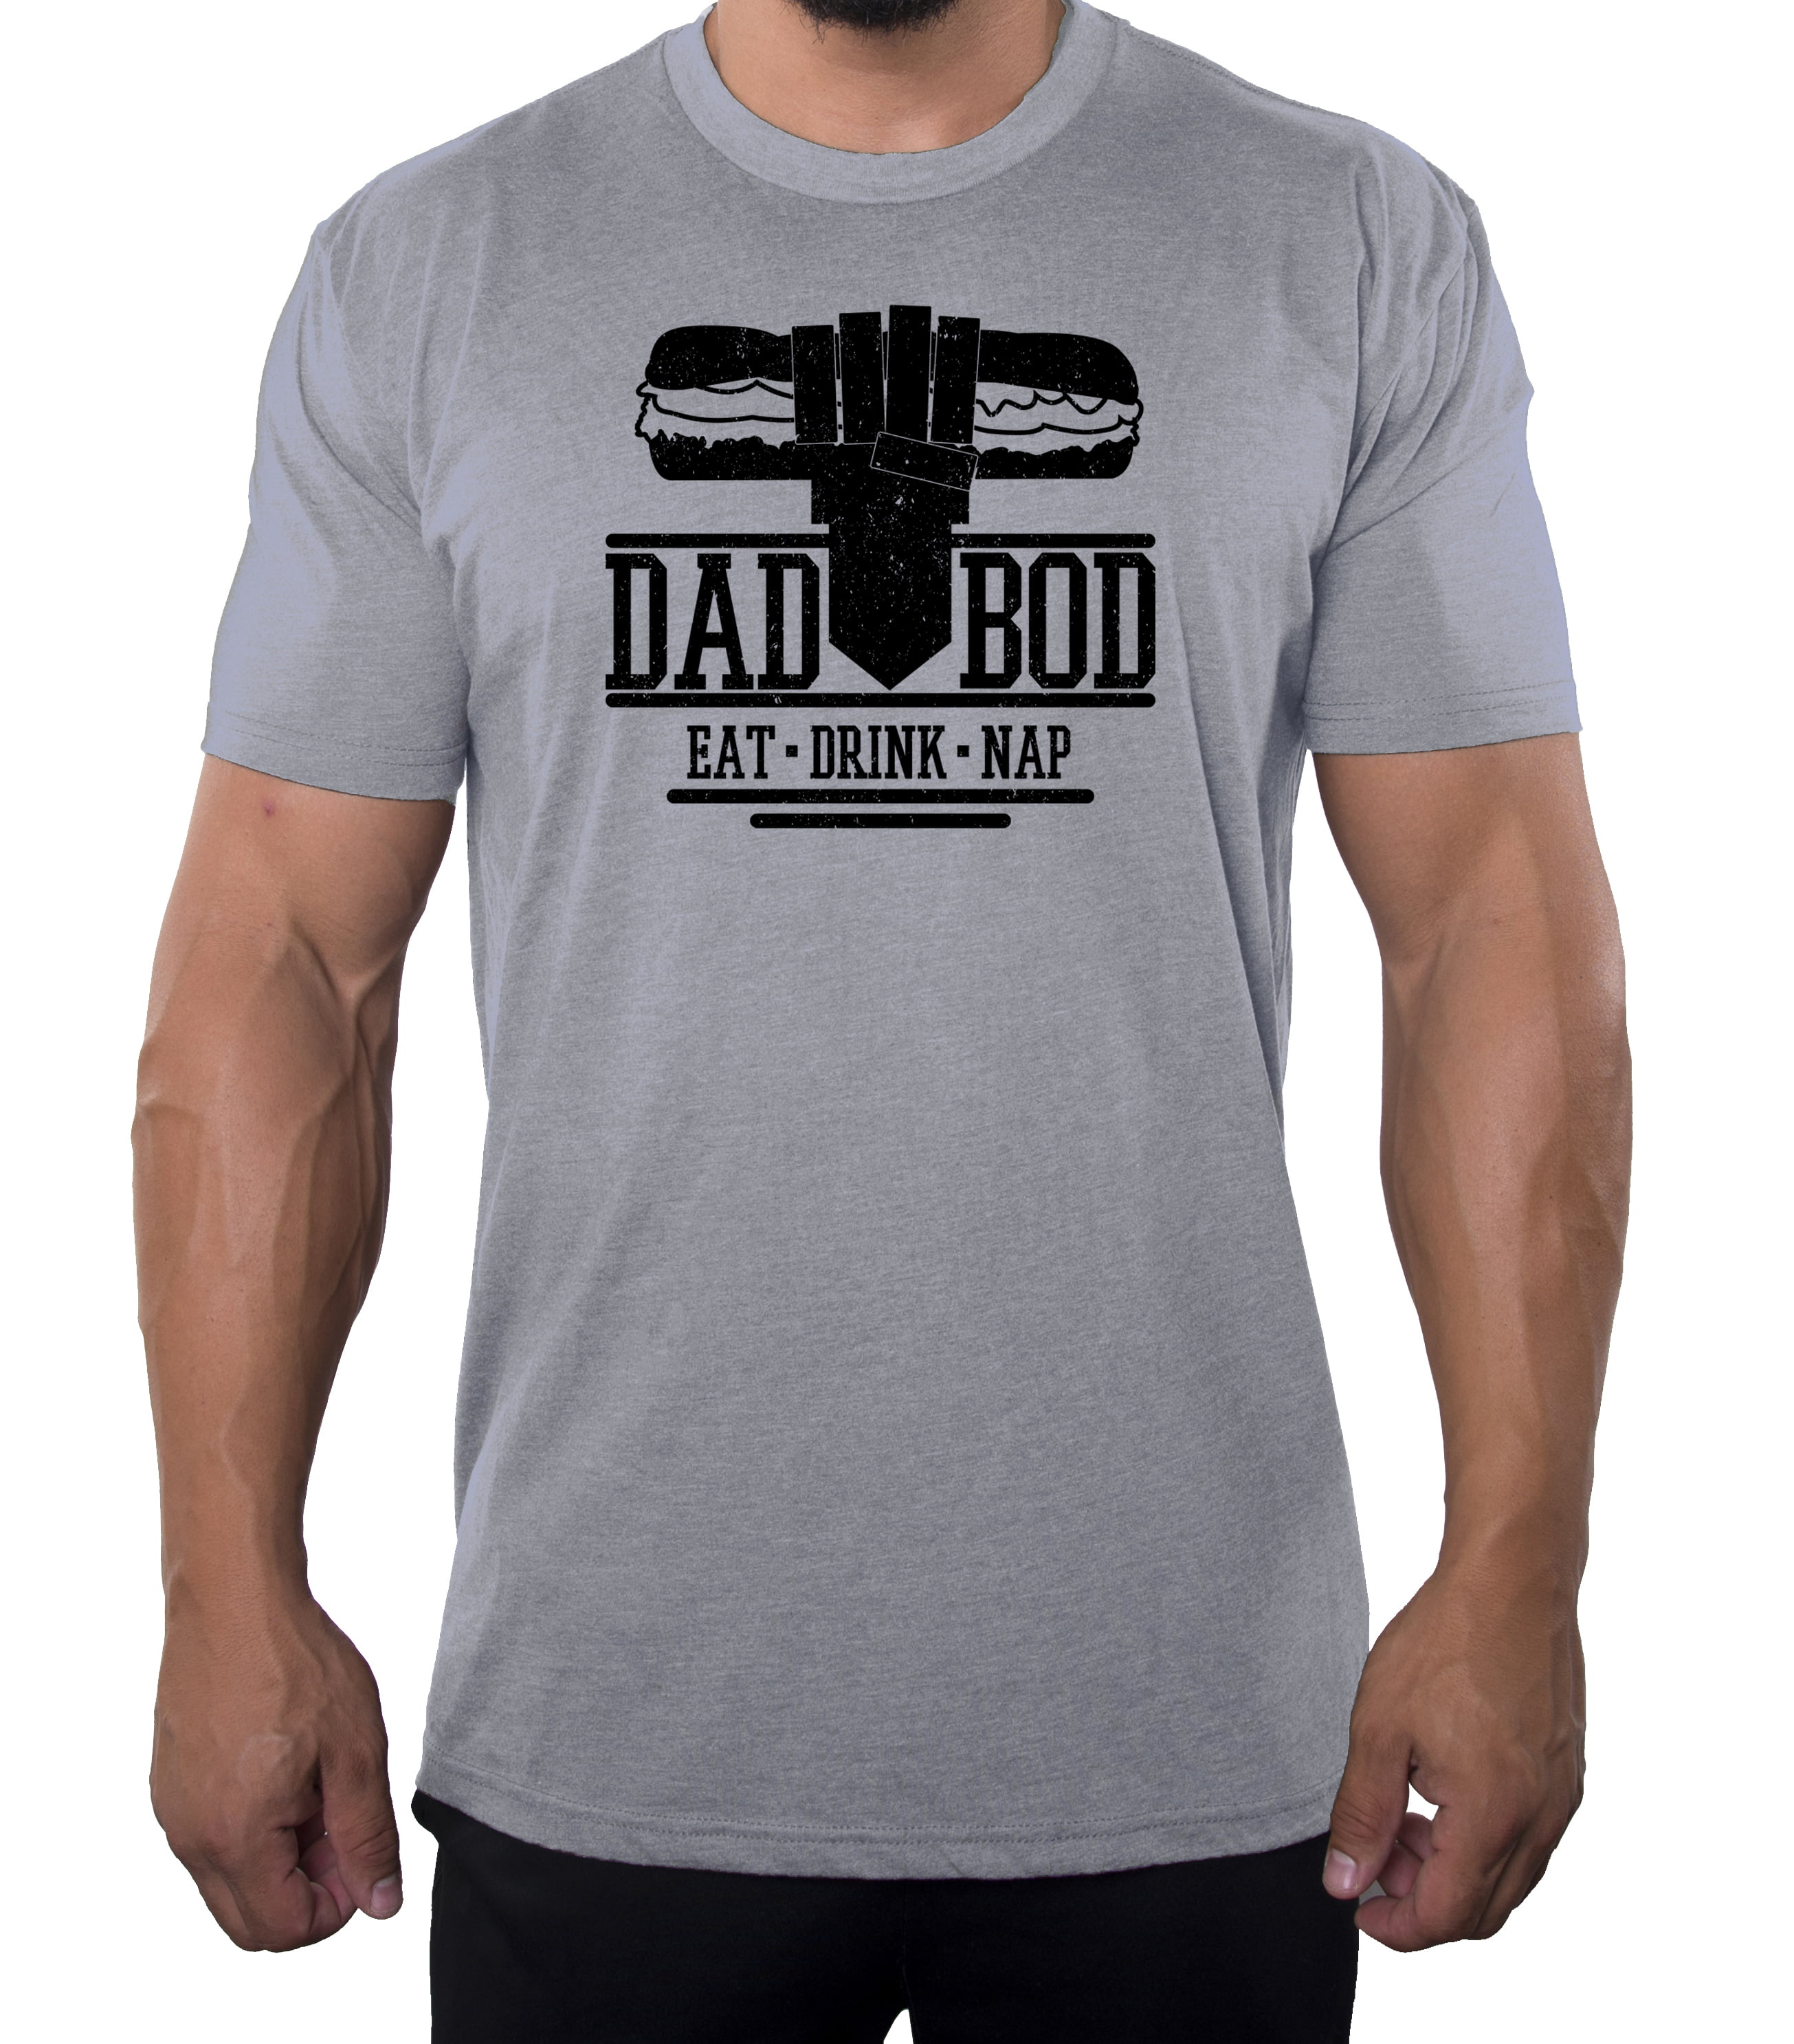 Dad Bod Shirt Eat Drink Nap, Funny Dad Shirts, Men's Graphic T-shirts -  Heather Grey MH200DAD S19 2XL